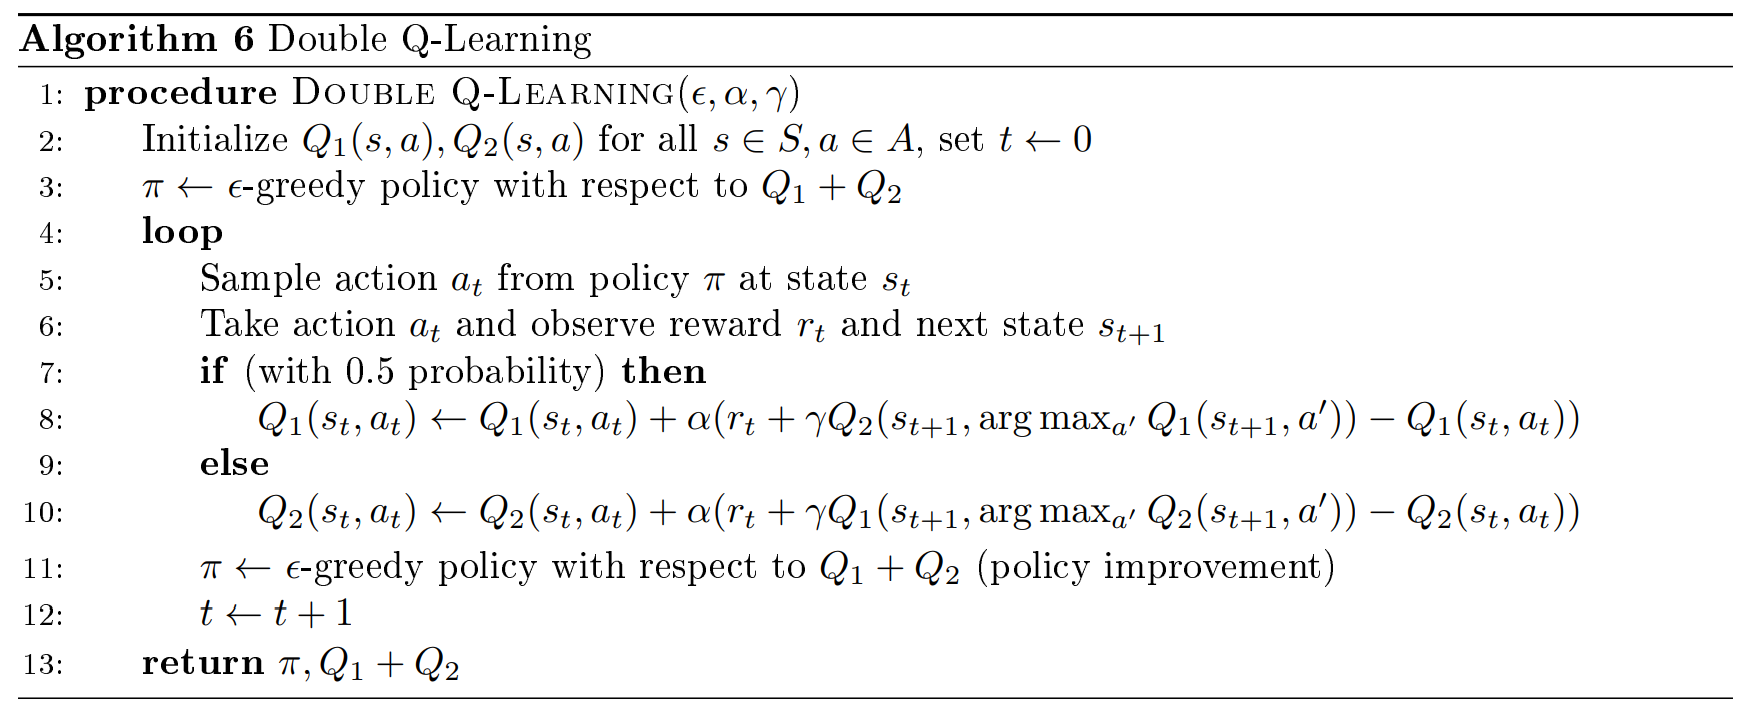 docs/stanford-cs234-notes-zh/img/fig4_alg_6.png